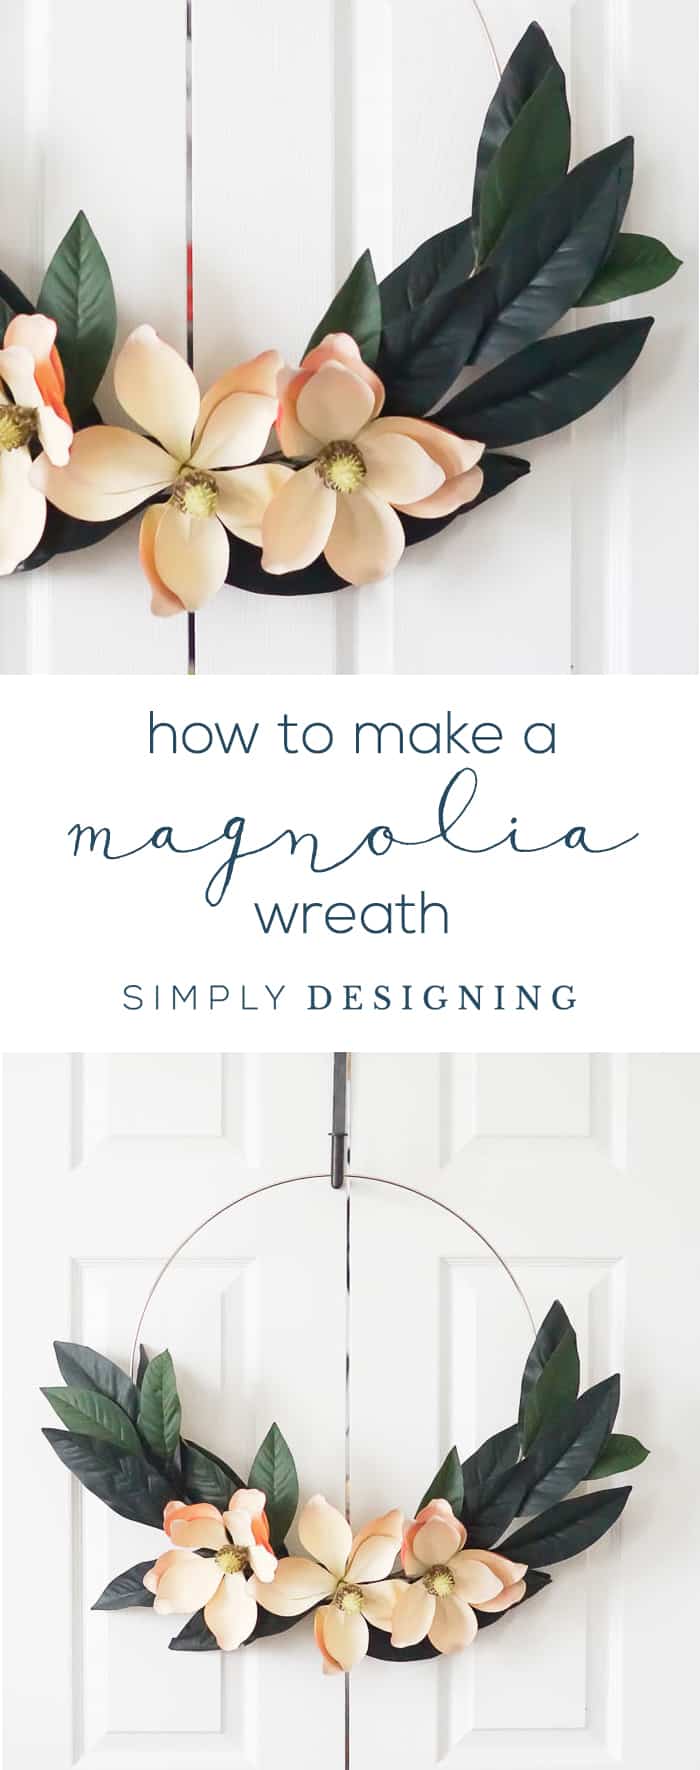 How to Make a Magnolia Hoop Wreath - this beautiful magnolia wreath is the perfect white winter wreath or elegant summer wreath for your home - How to make a Magnolia Farmhouse Wreath